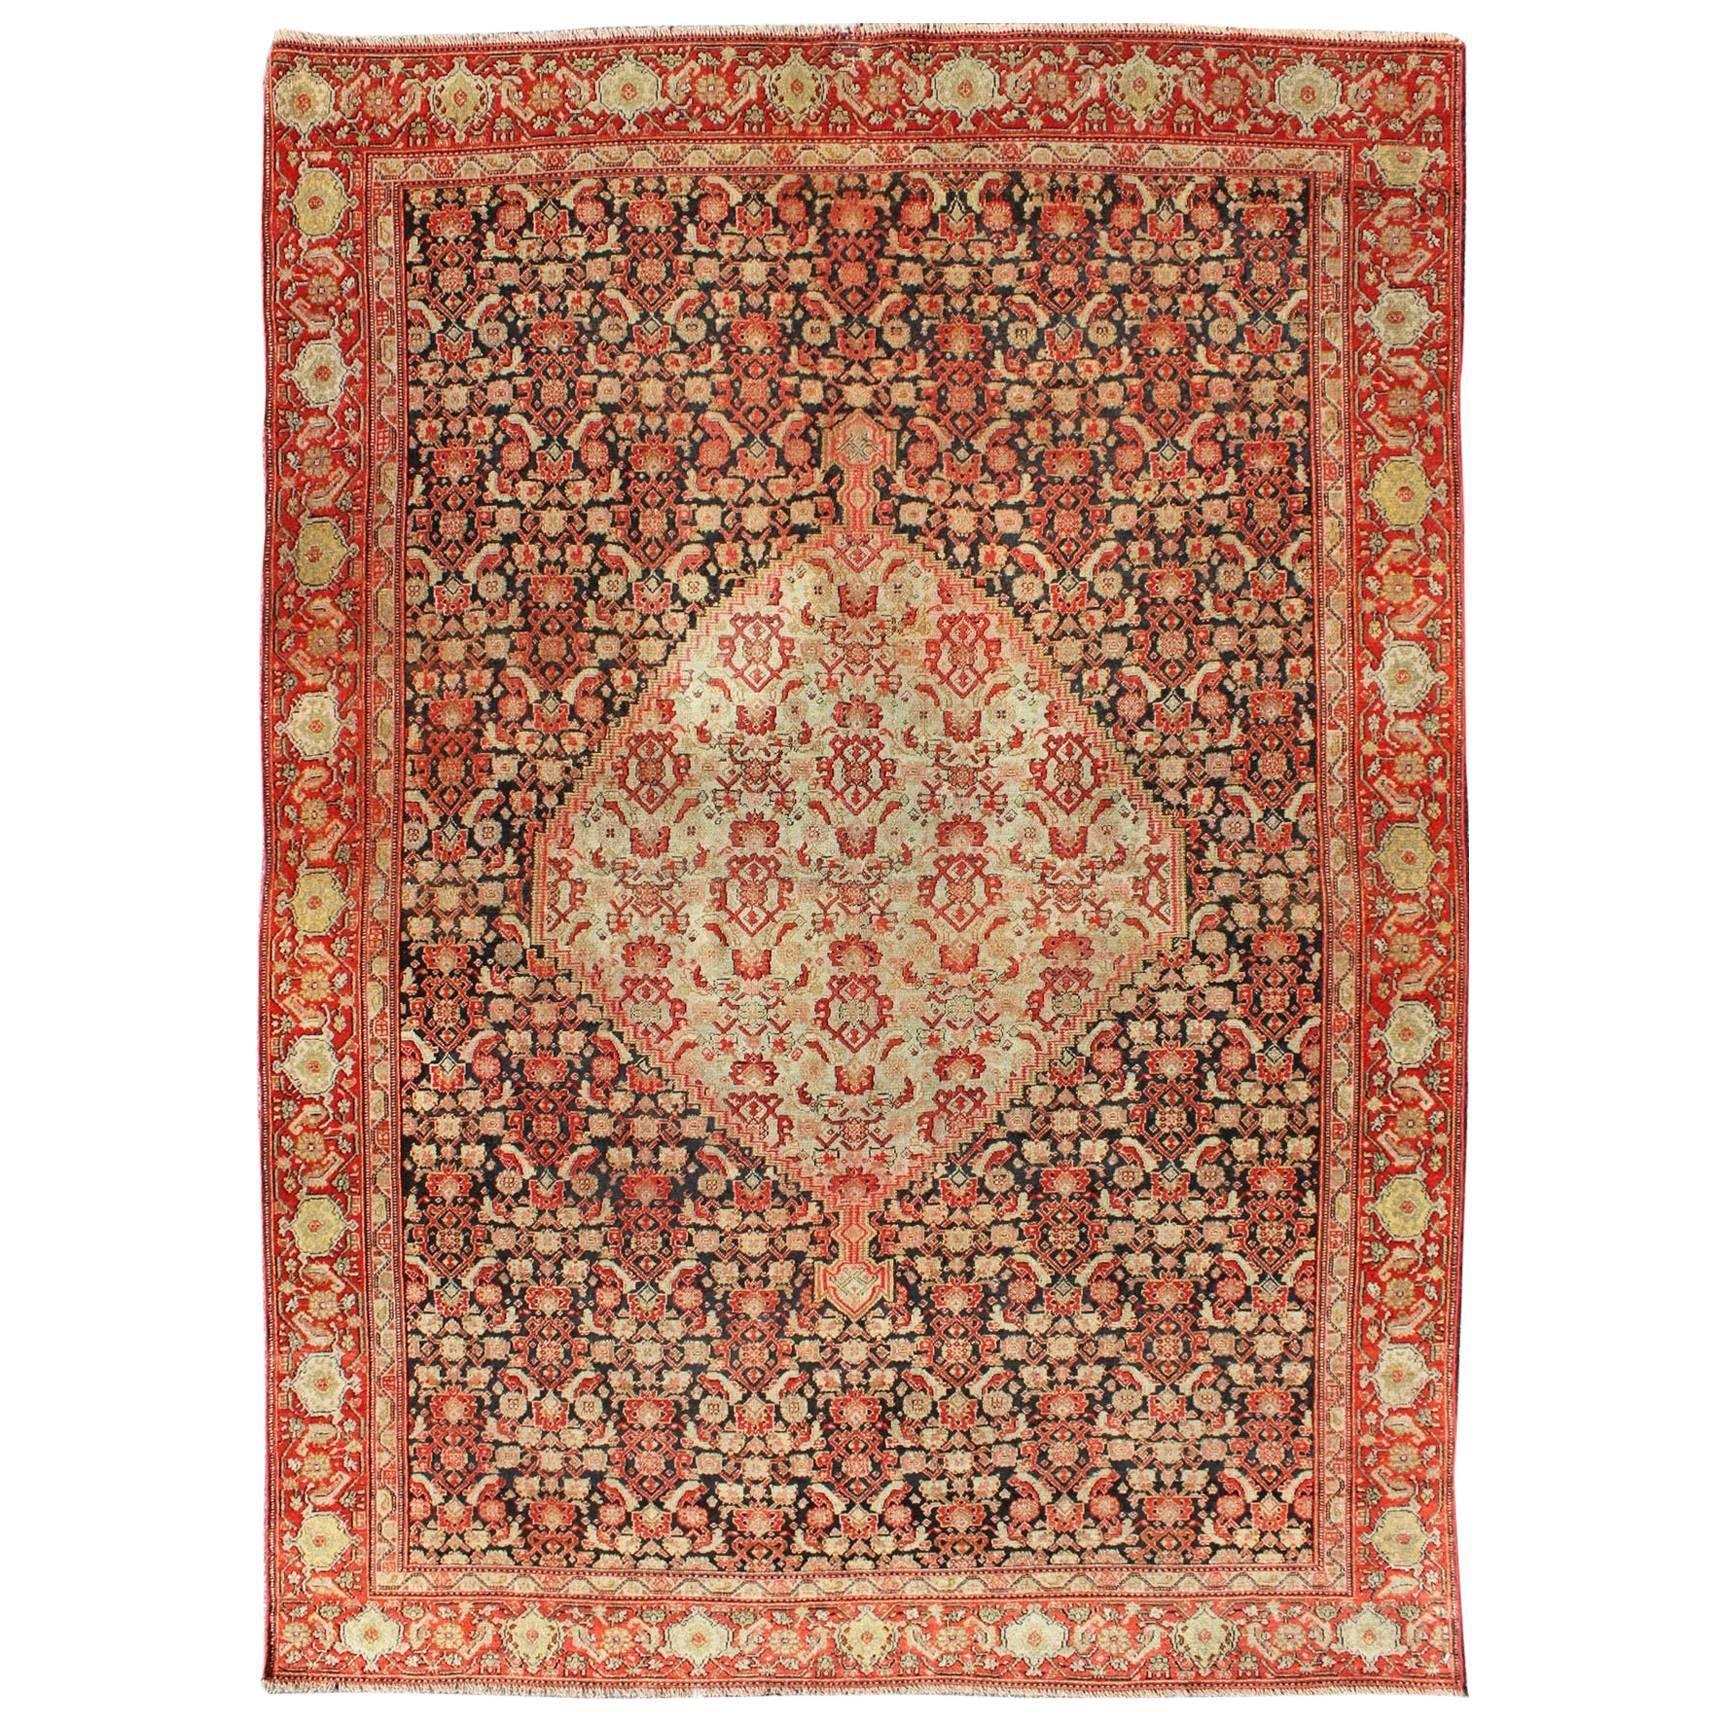 Antique Persian Senneh Rug with Unique Medallion and All-Over Design